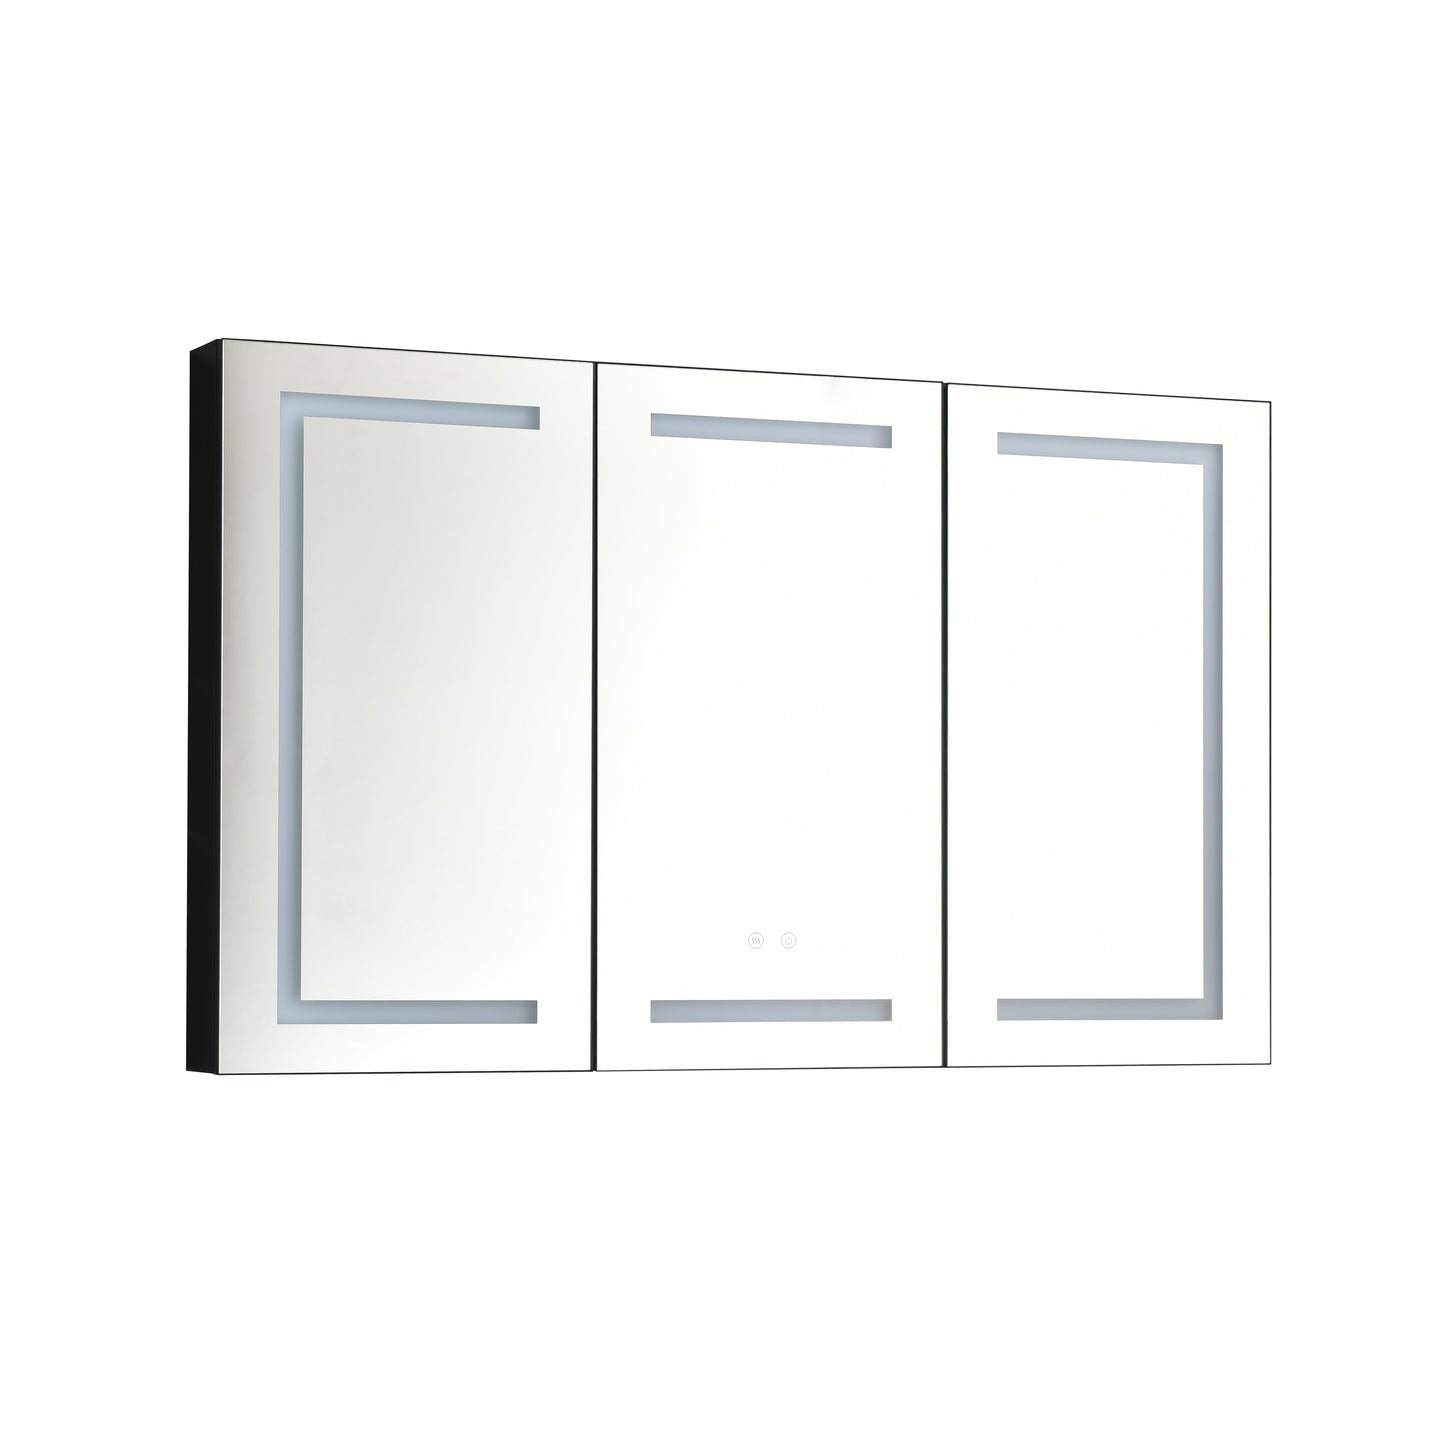 LTL needs to consult the warehouse addressLED Mirror Medicine Cabinet with Lights, Dimmer, Defogger, Clock, Temp Display,  and USB (48”W x 30”H x 5.59”D)